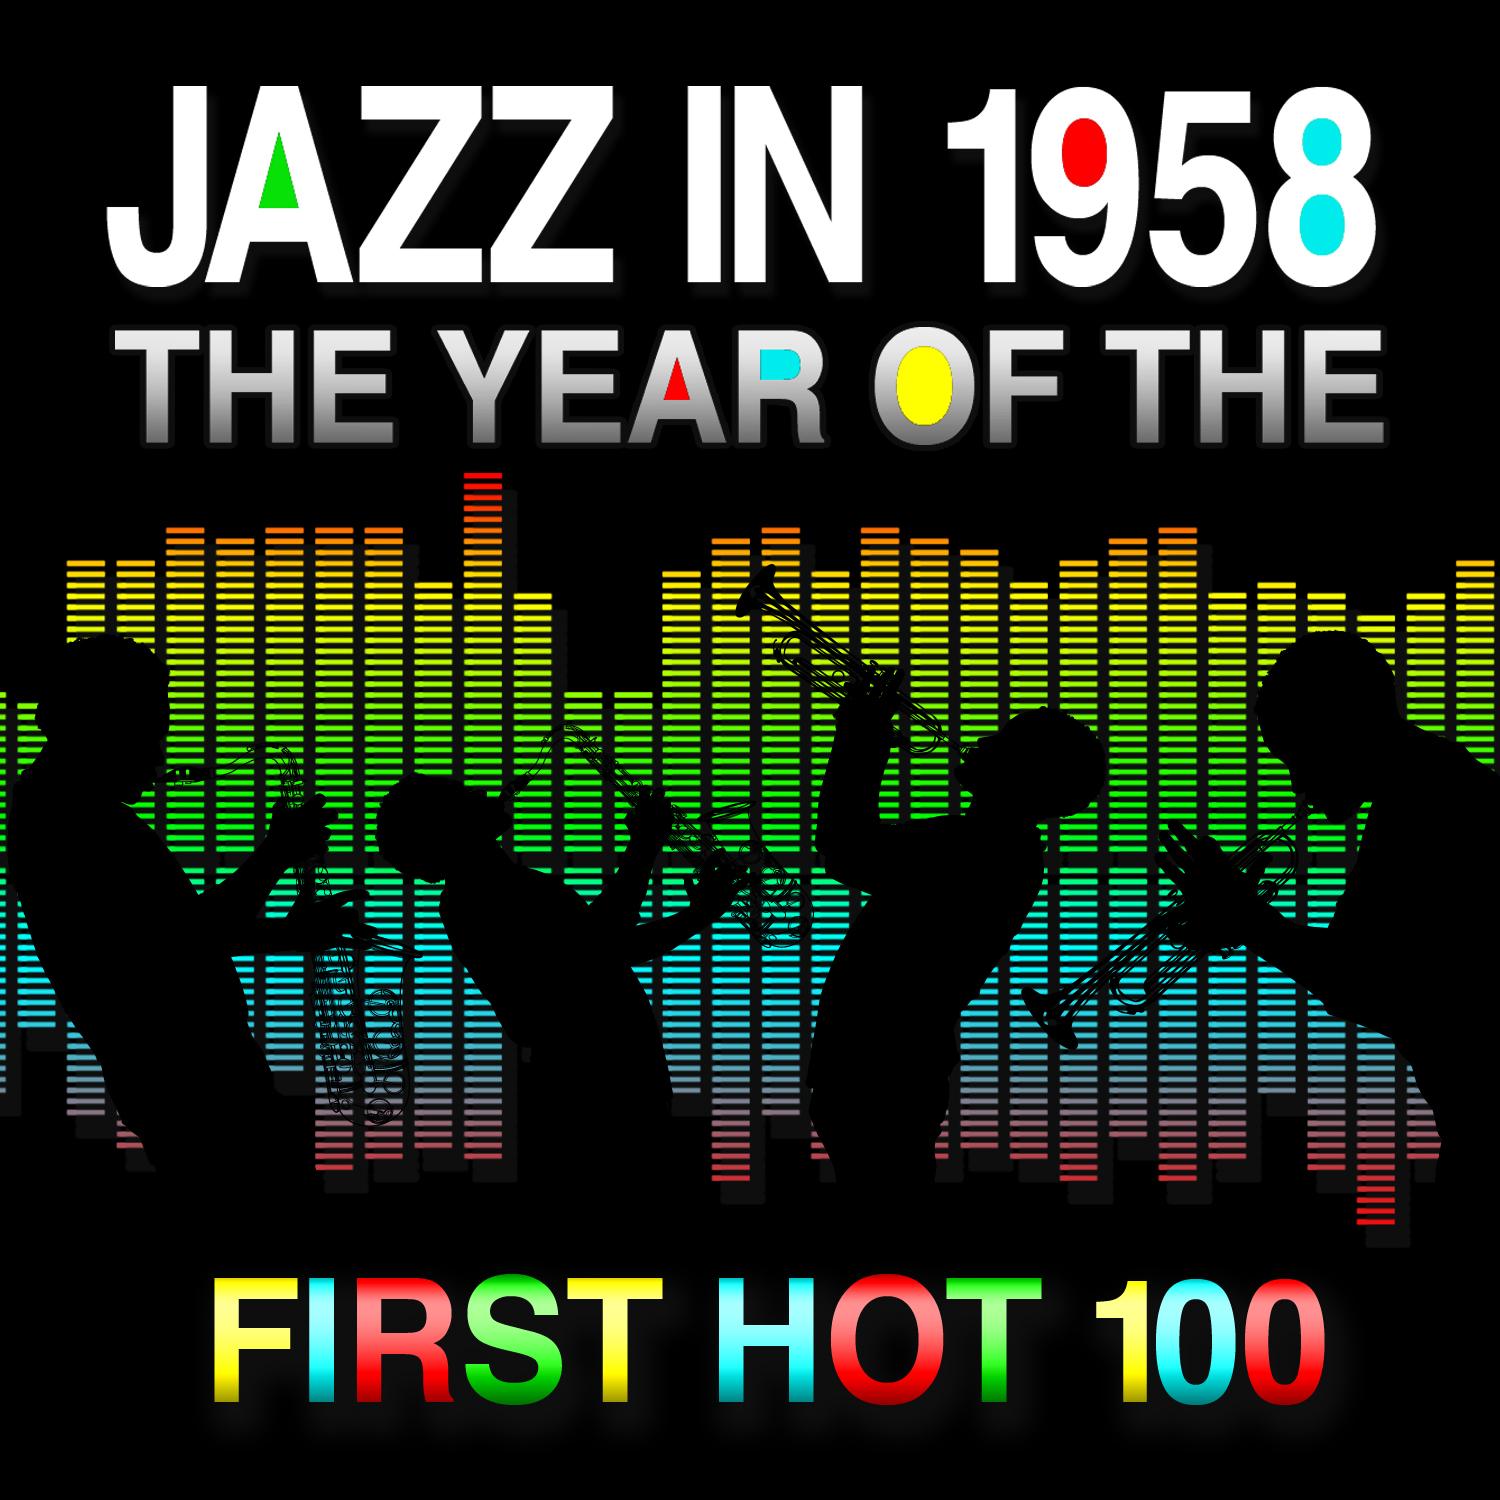 Jazz in 1958 - The Year of the First Hot 100